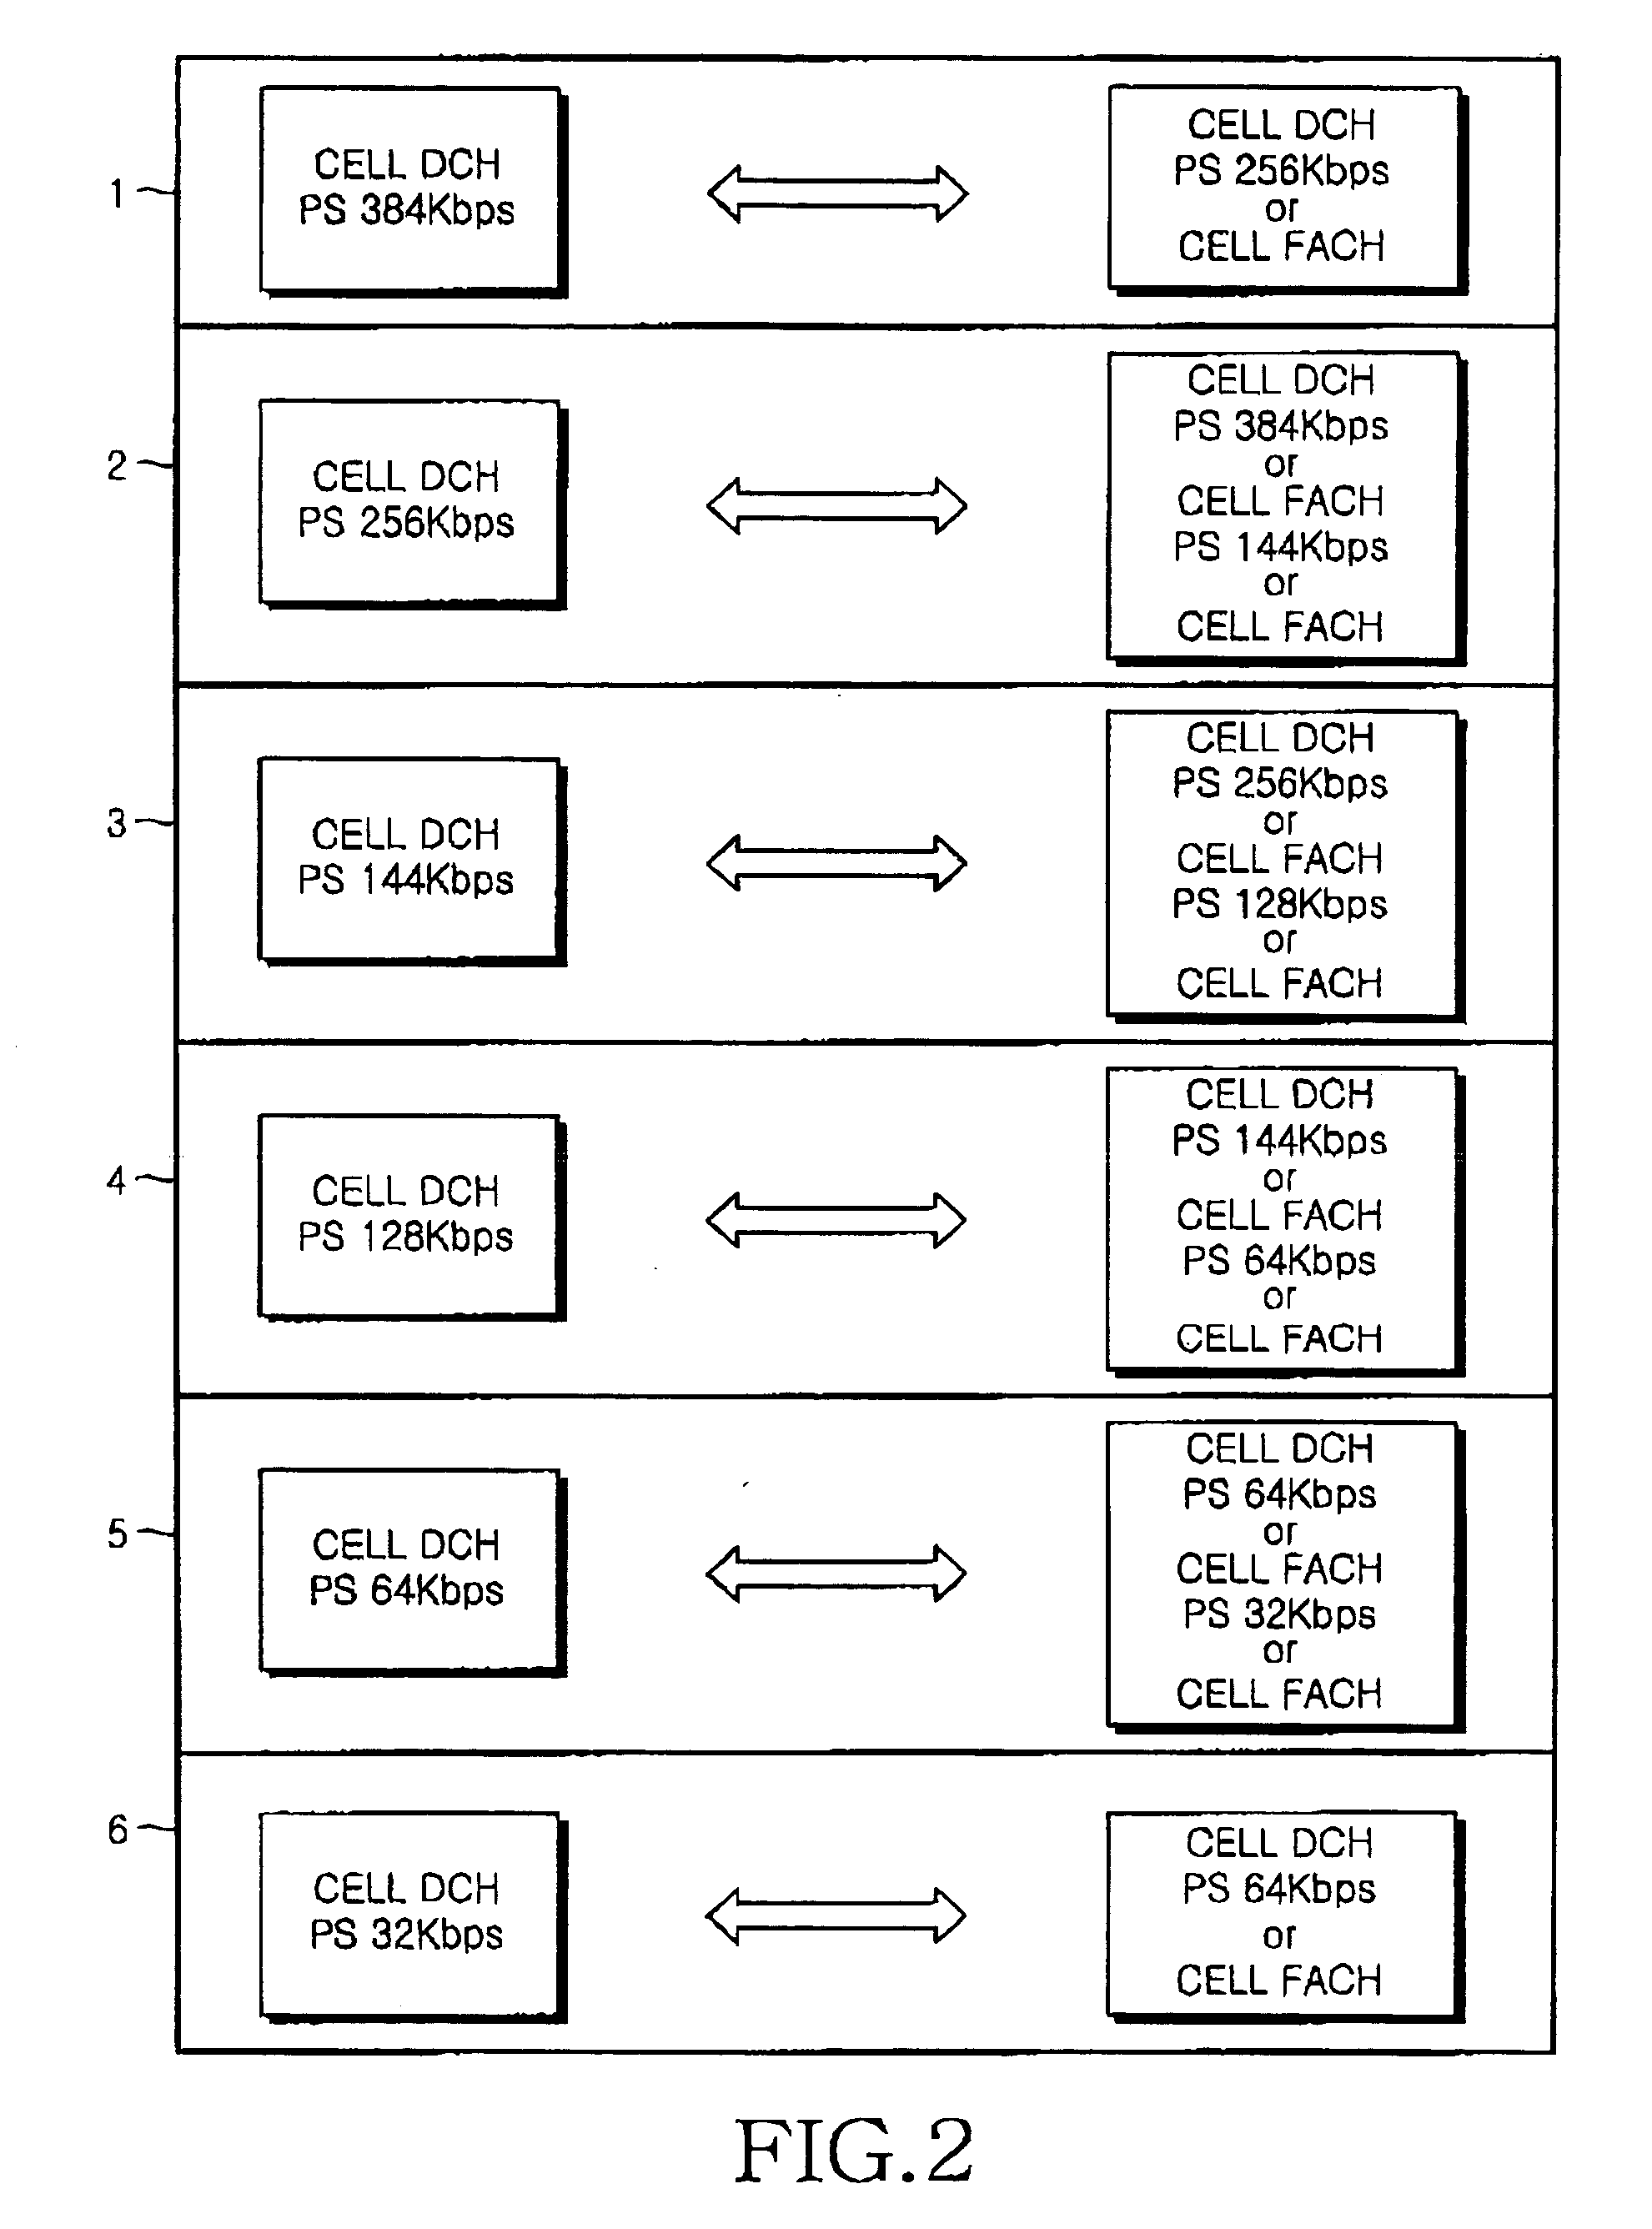 System and method of efficiently providing packet data service in a UMTS system